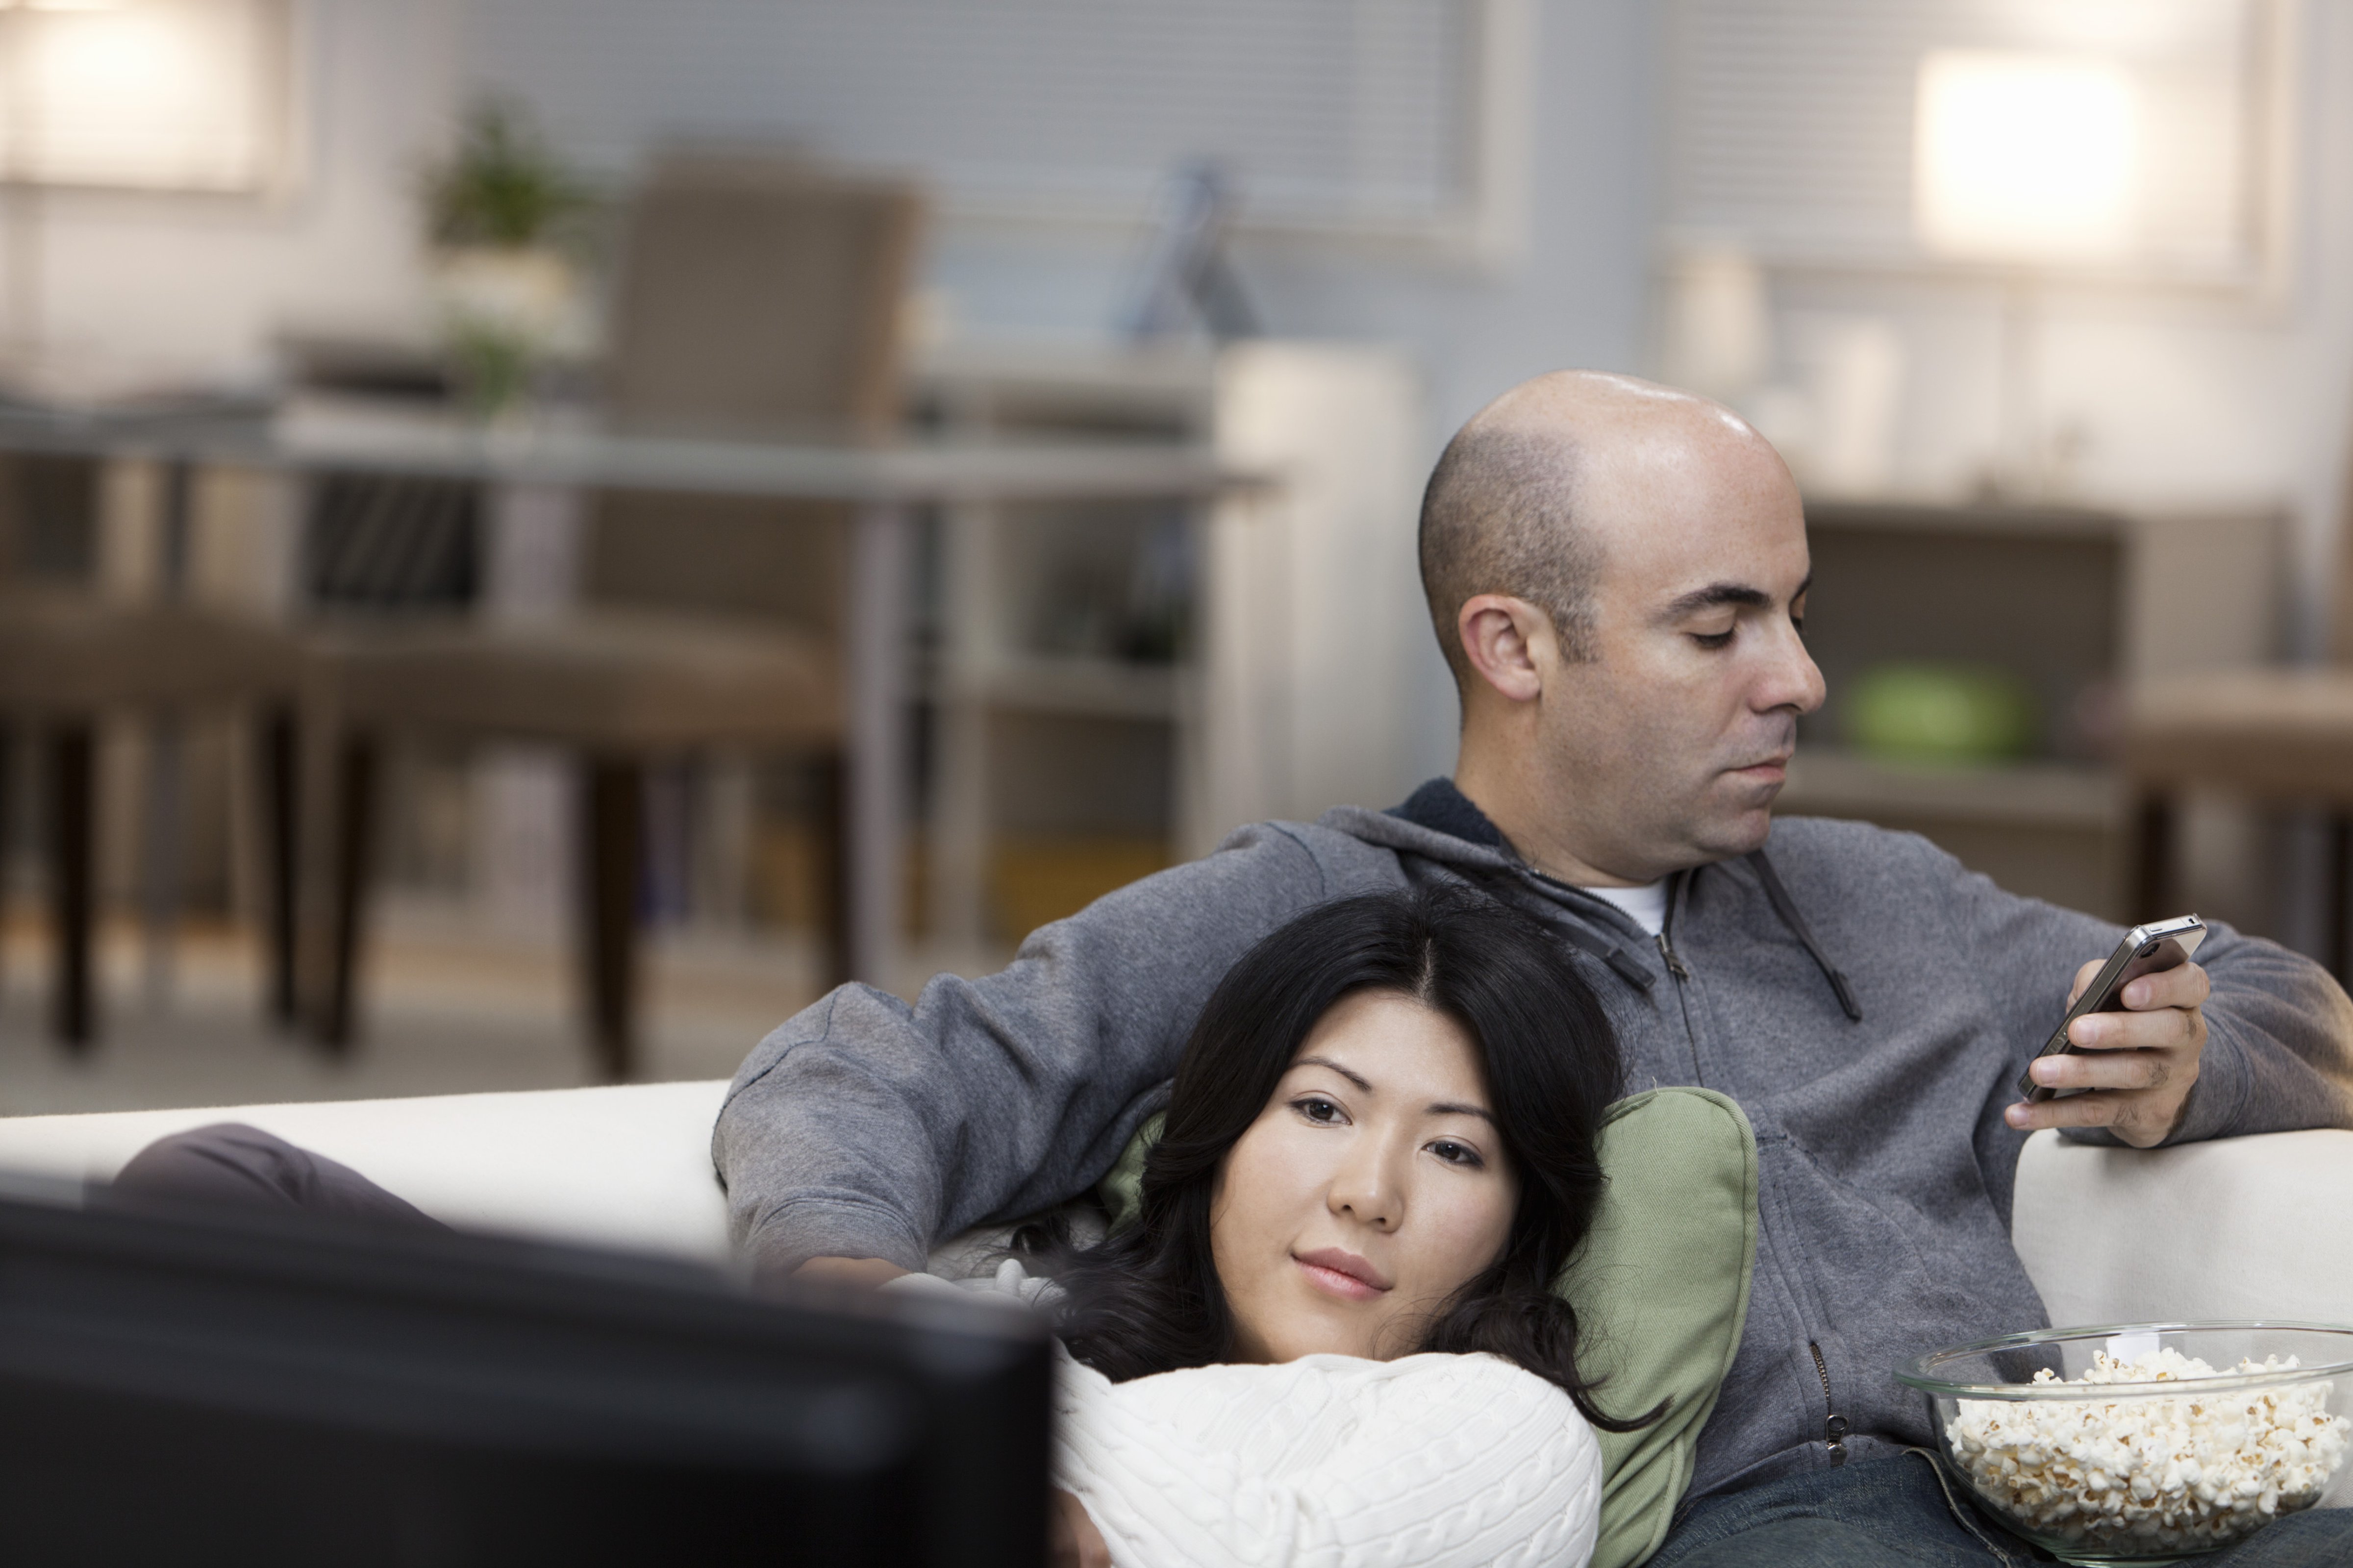 Couple on sofa watching television together